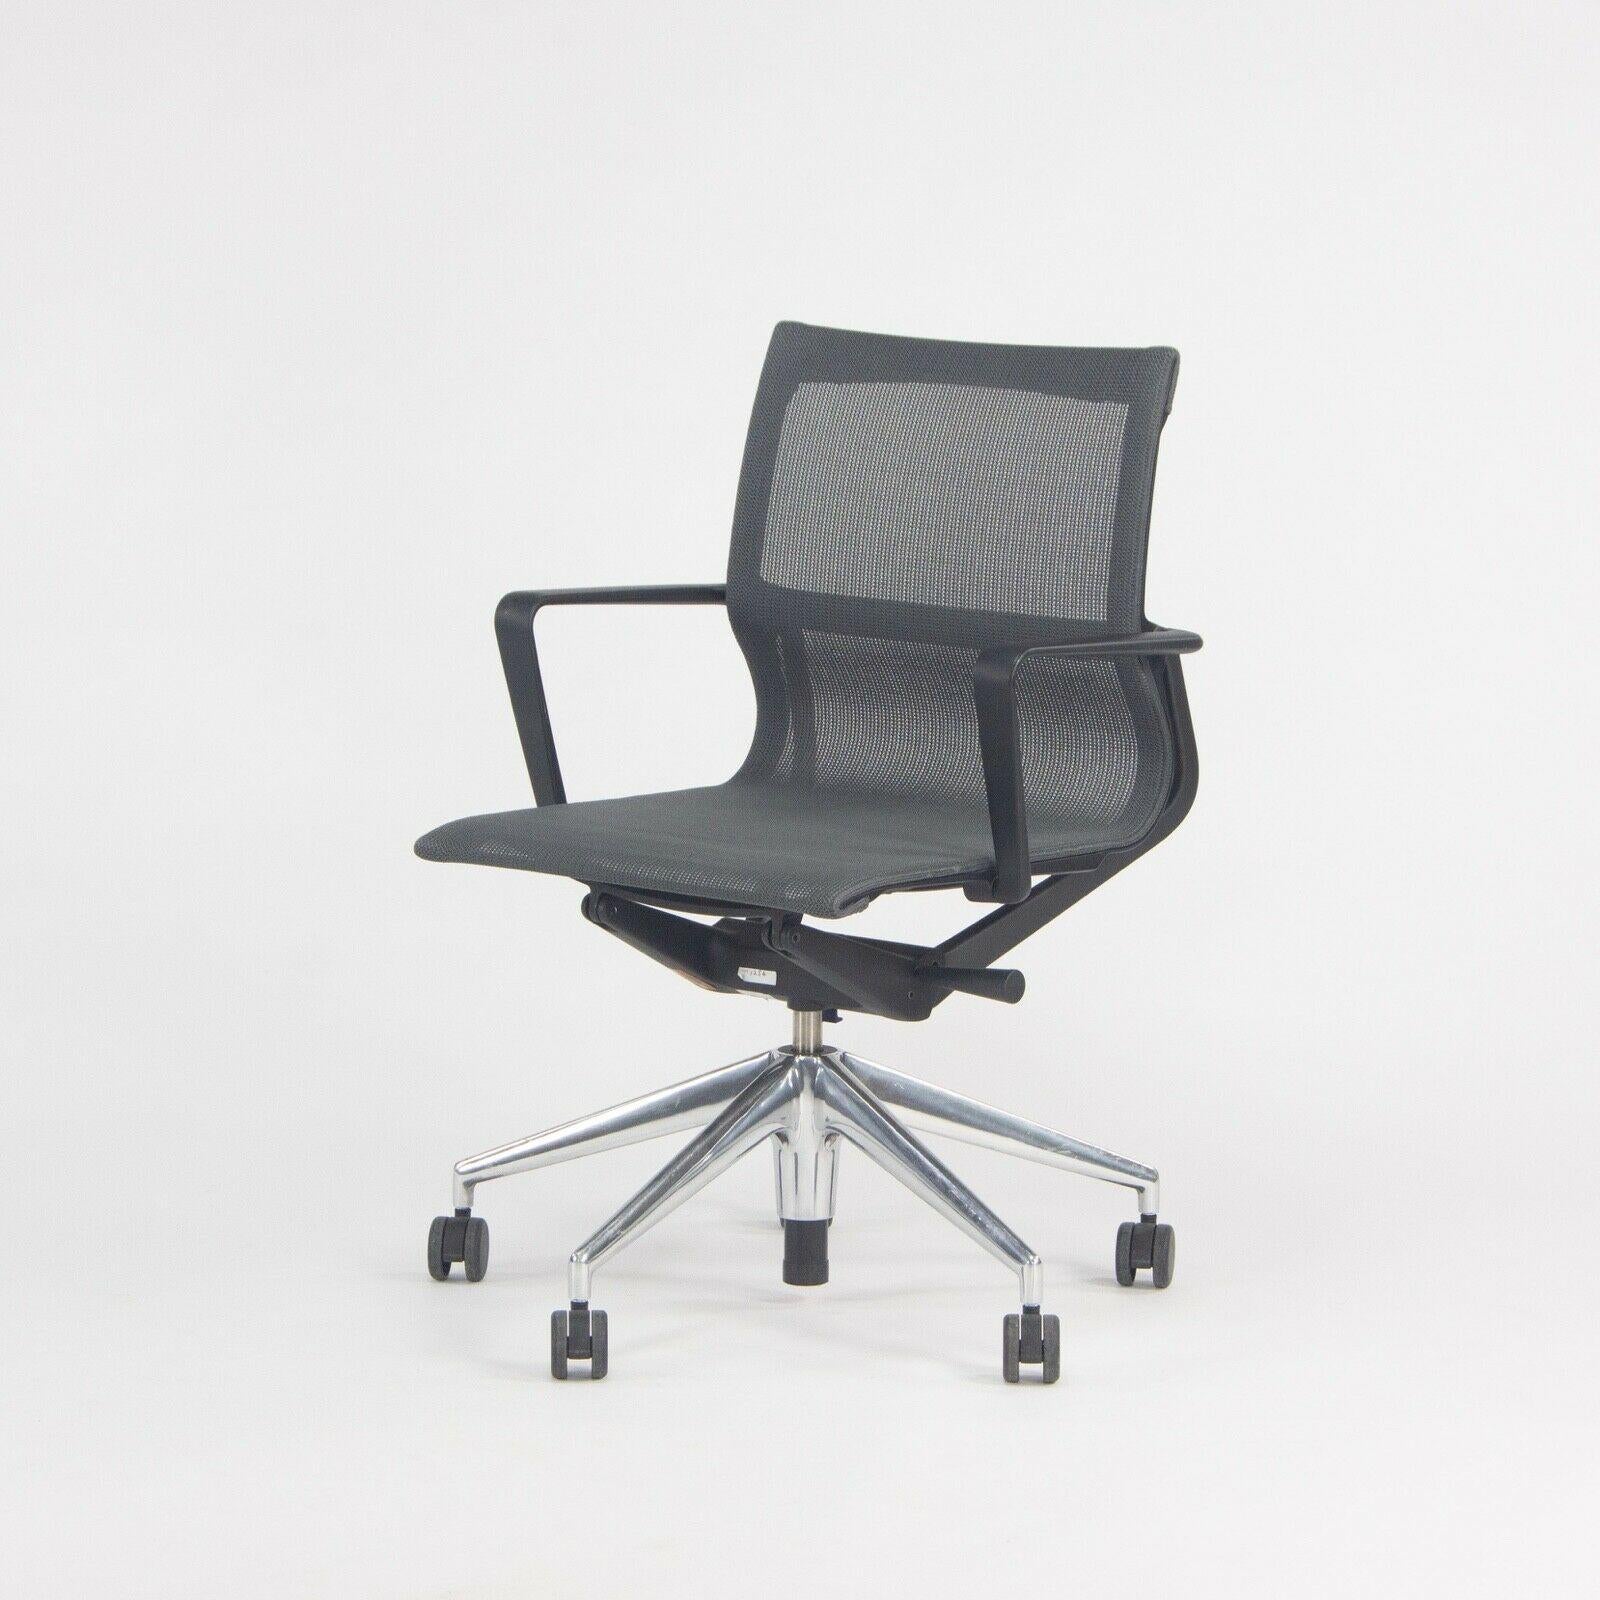 2018 Vitra Physix Rolling Desk Chair by Alberta Meda Gray Mesh Sets Available For Sale 2